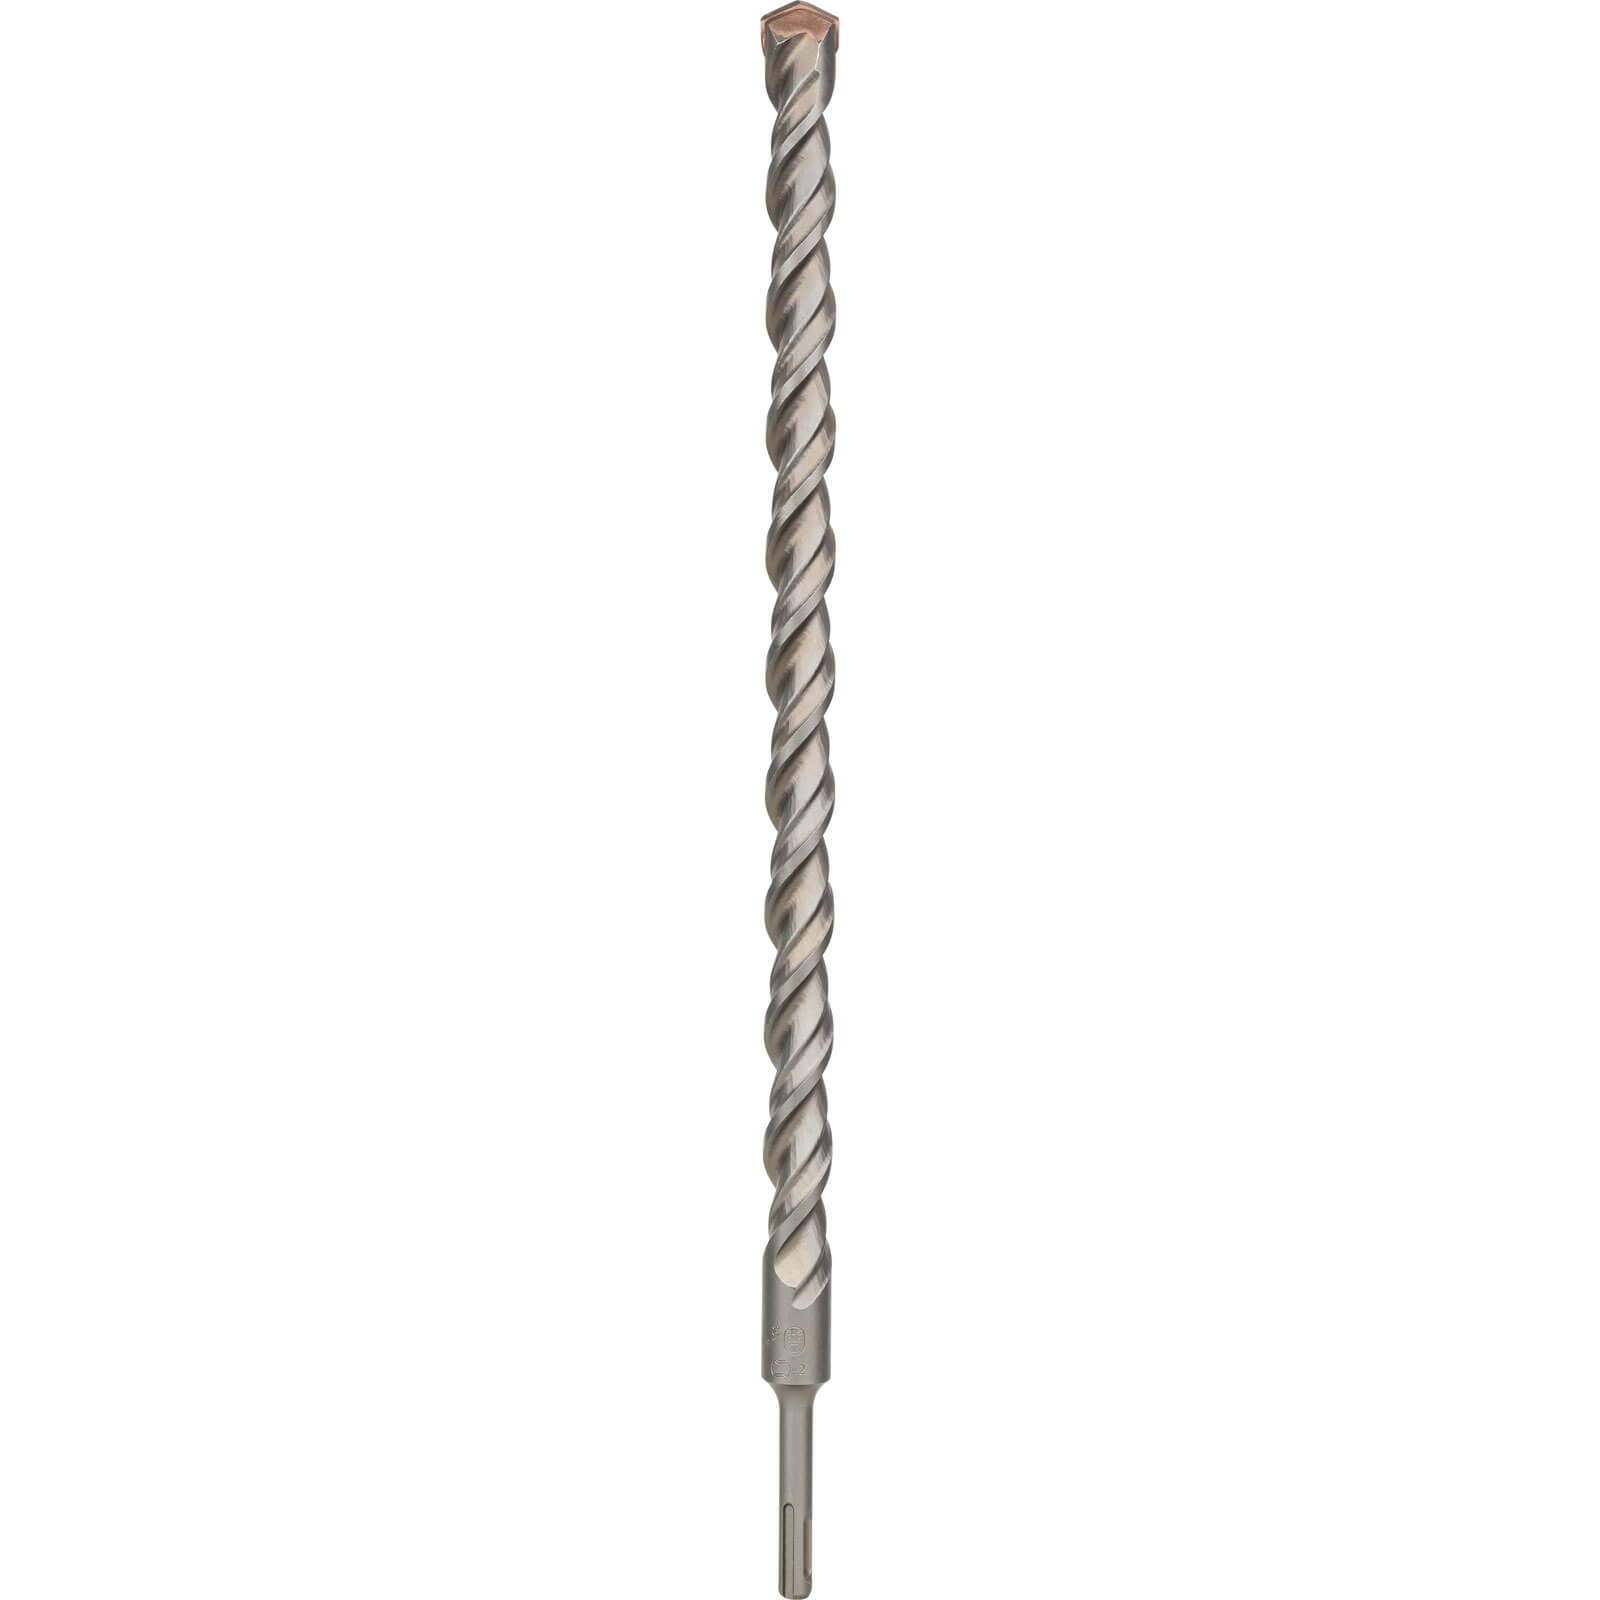 Image of Bosch Series 3 SDS Plus Masonry Drill Bit 22mm 450mm Pack of 1